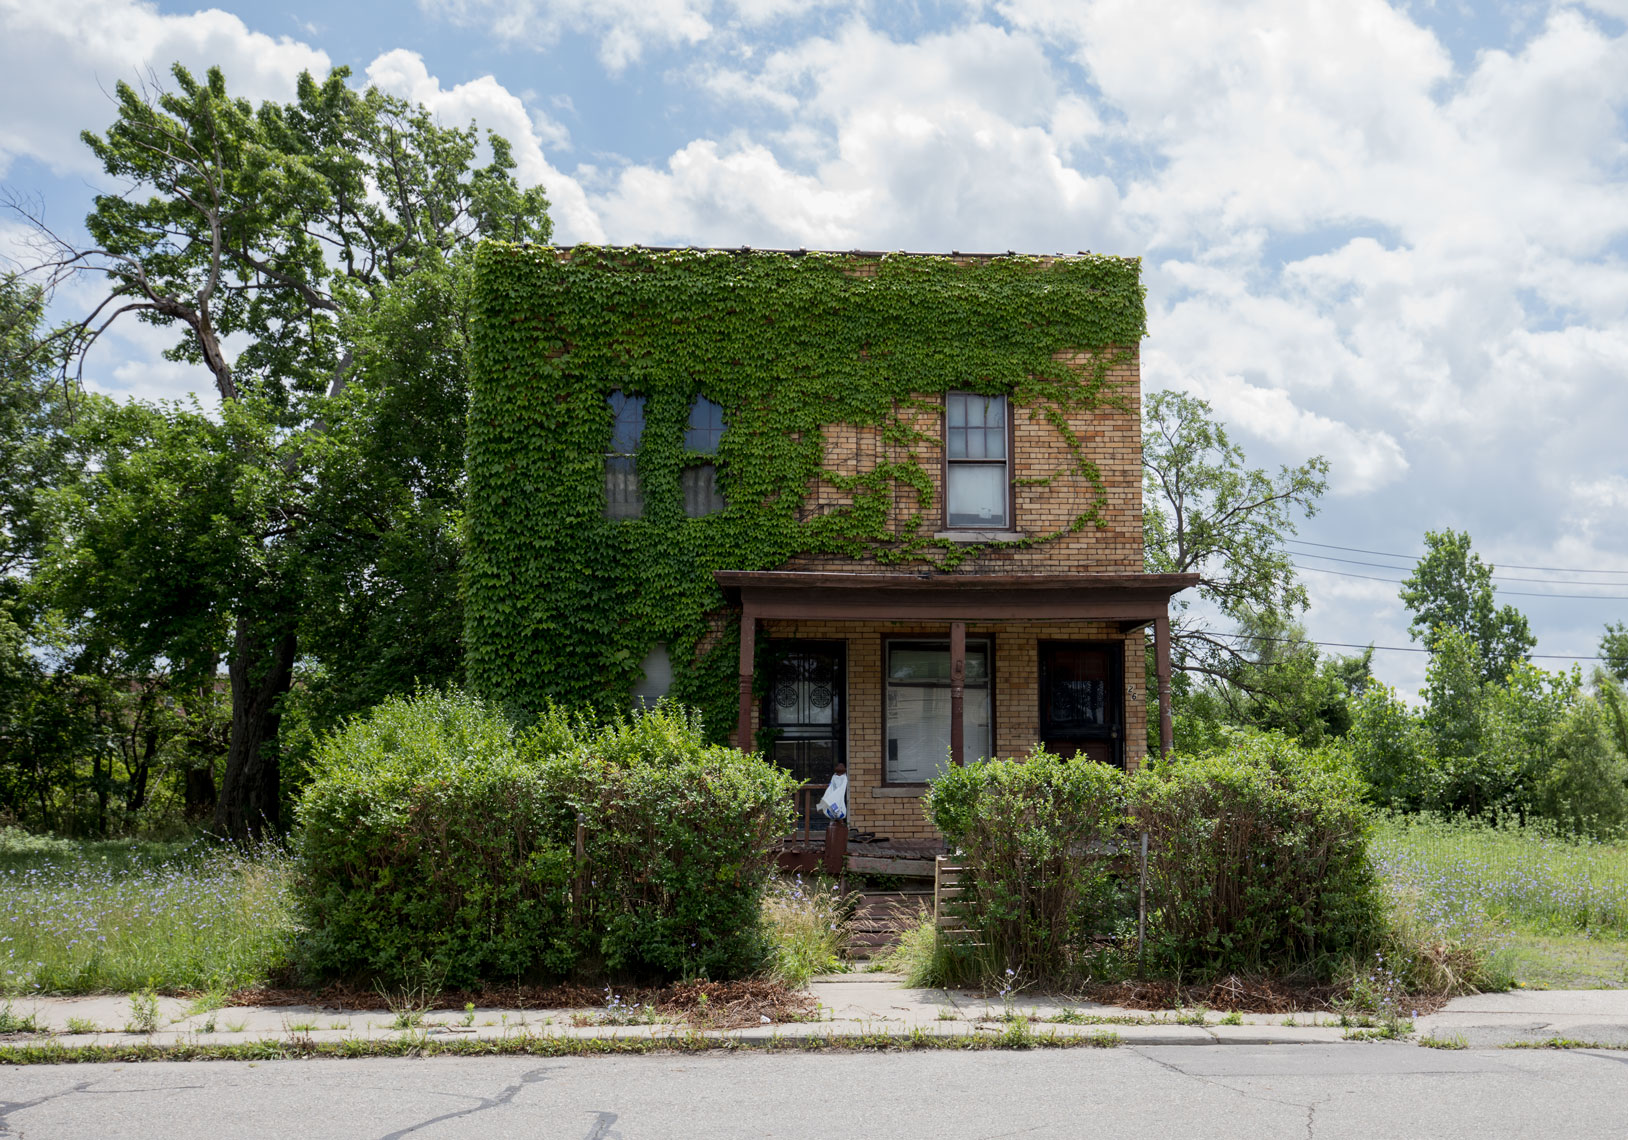 Old house in Detroit